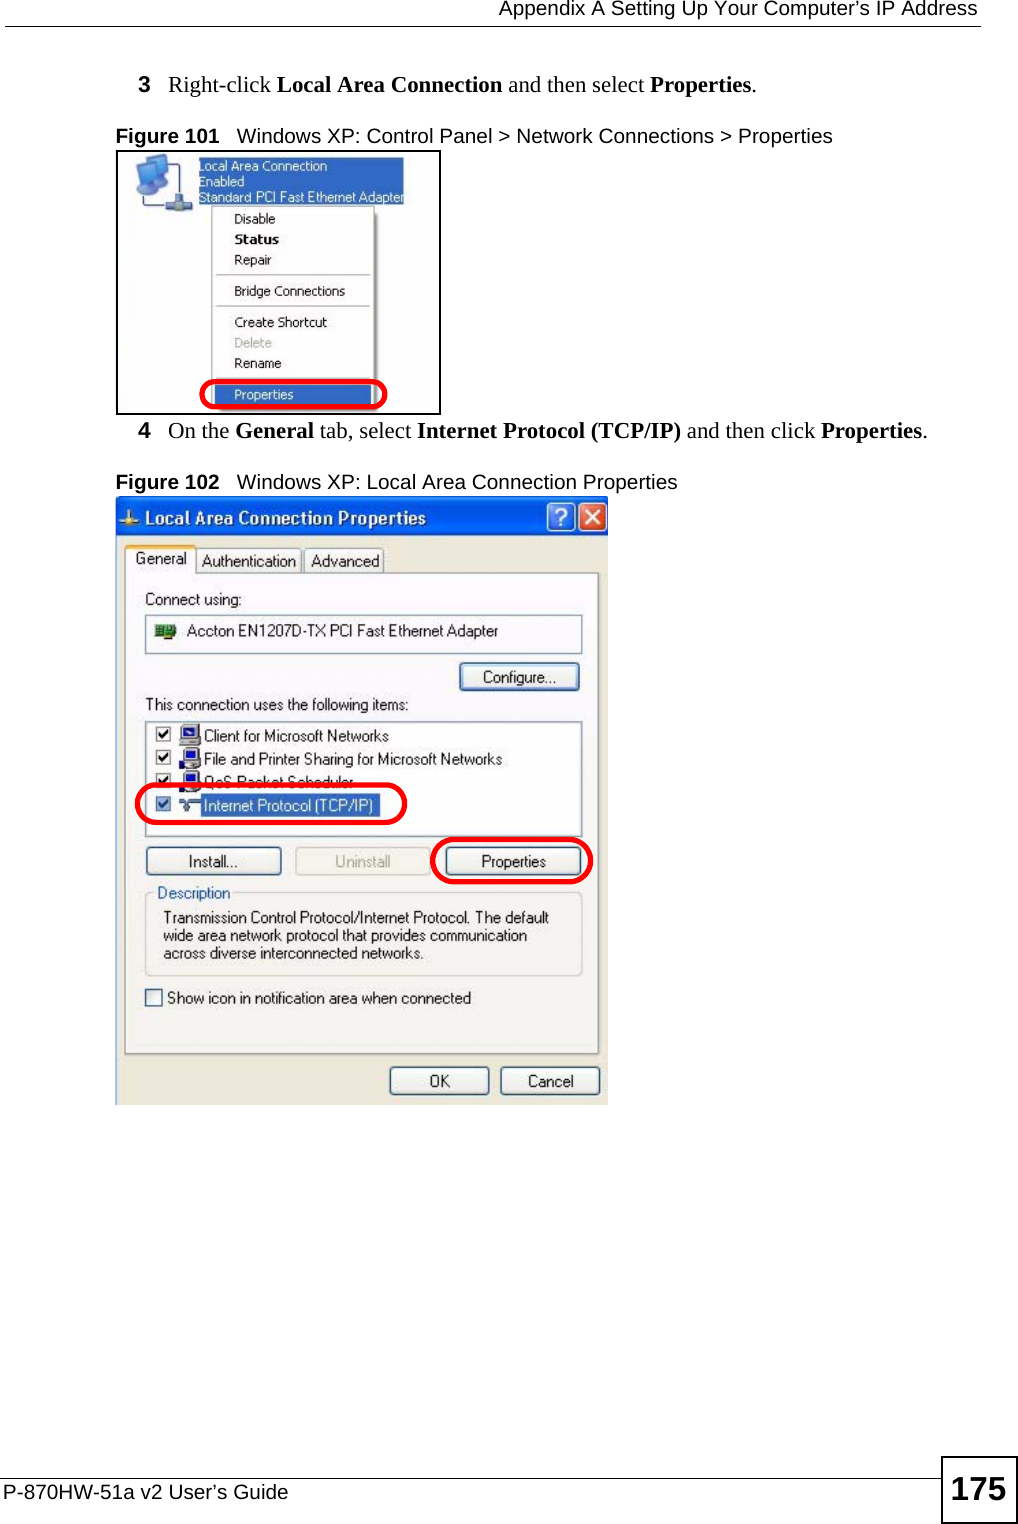  Appendix A Setting Up Your Computer’s IP AddressP-870HW-51a v2 User’s Guide 1753Right-click Local Area Connection and then select Properties.Figure 101   Windows XP: Control Panel &gt; Network Connections &gt; Properties4On the General tab, select Internet Protocol (TCP/IP) and then click Properties.Figure 102   Windows XP: Local Area Connection Properties